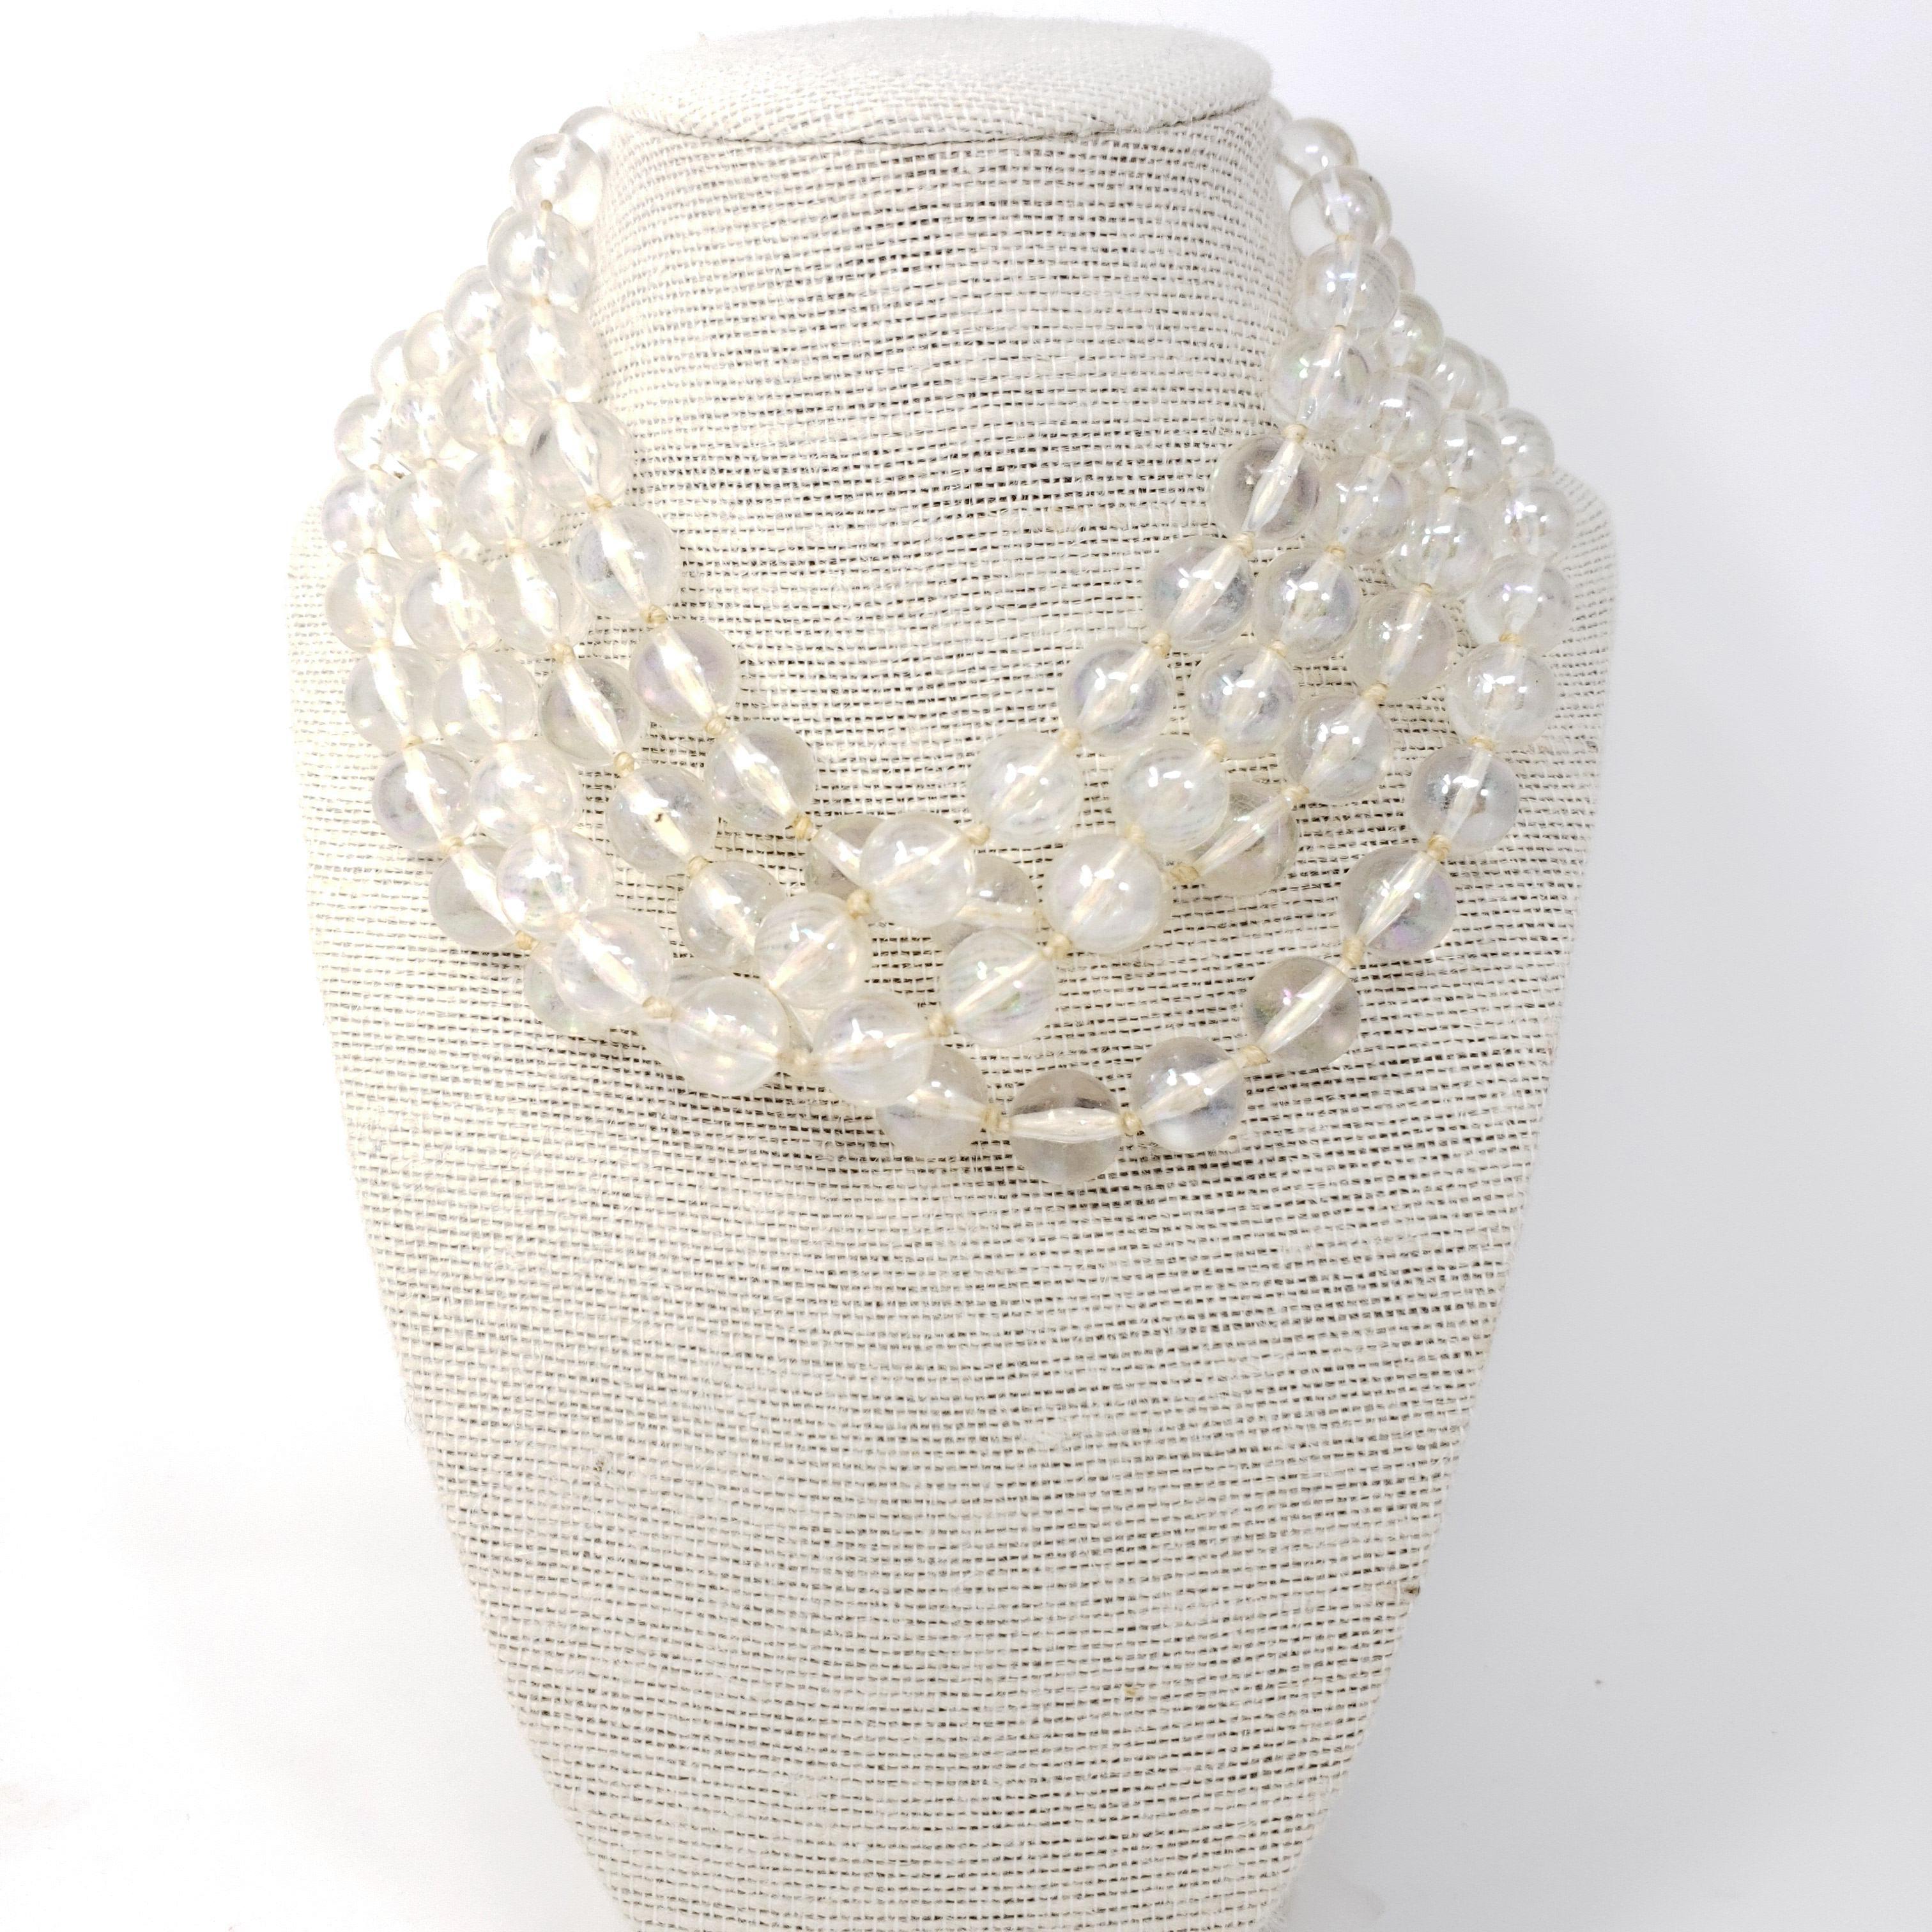 A stylish retro necklace originating in West Germany. Features clear iridescent beads on a knotted string necklace, secured with a gold-tone clasp. Very long - 62 inches around!

Marks / hallmarks / etc: W Germany